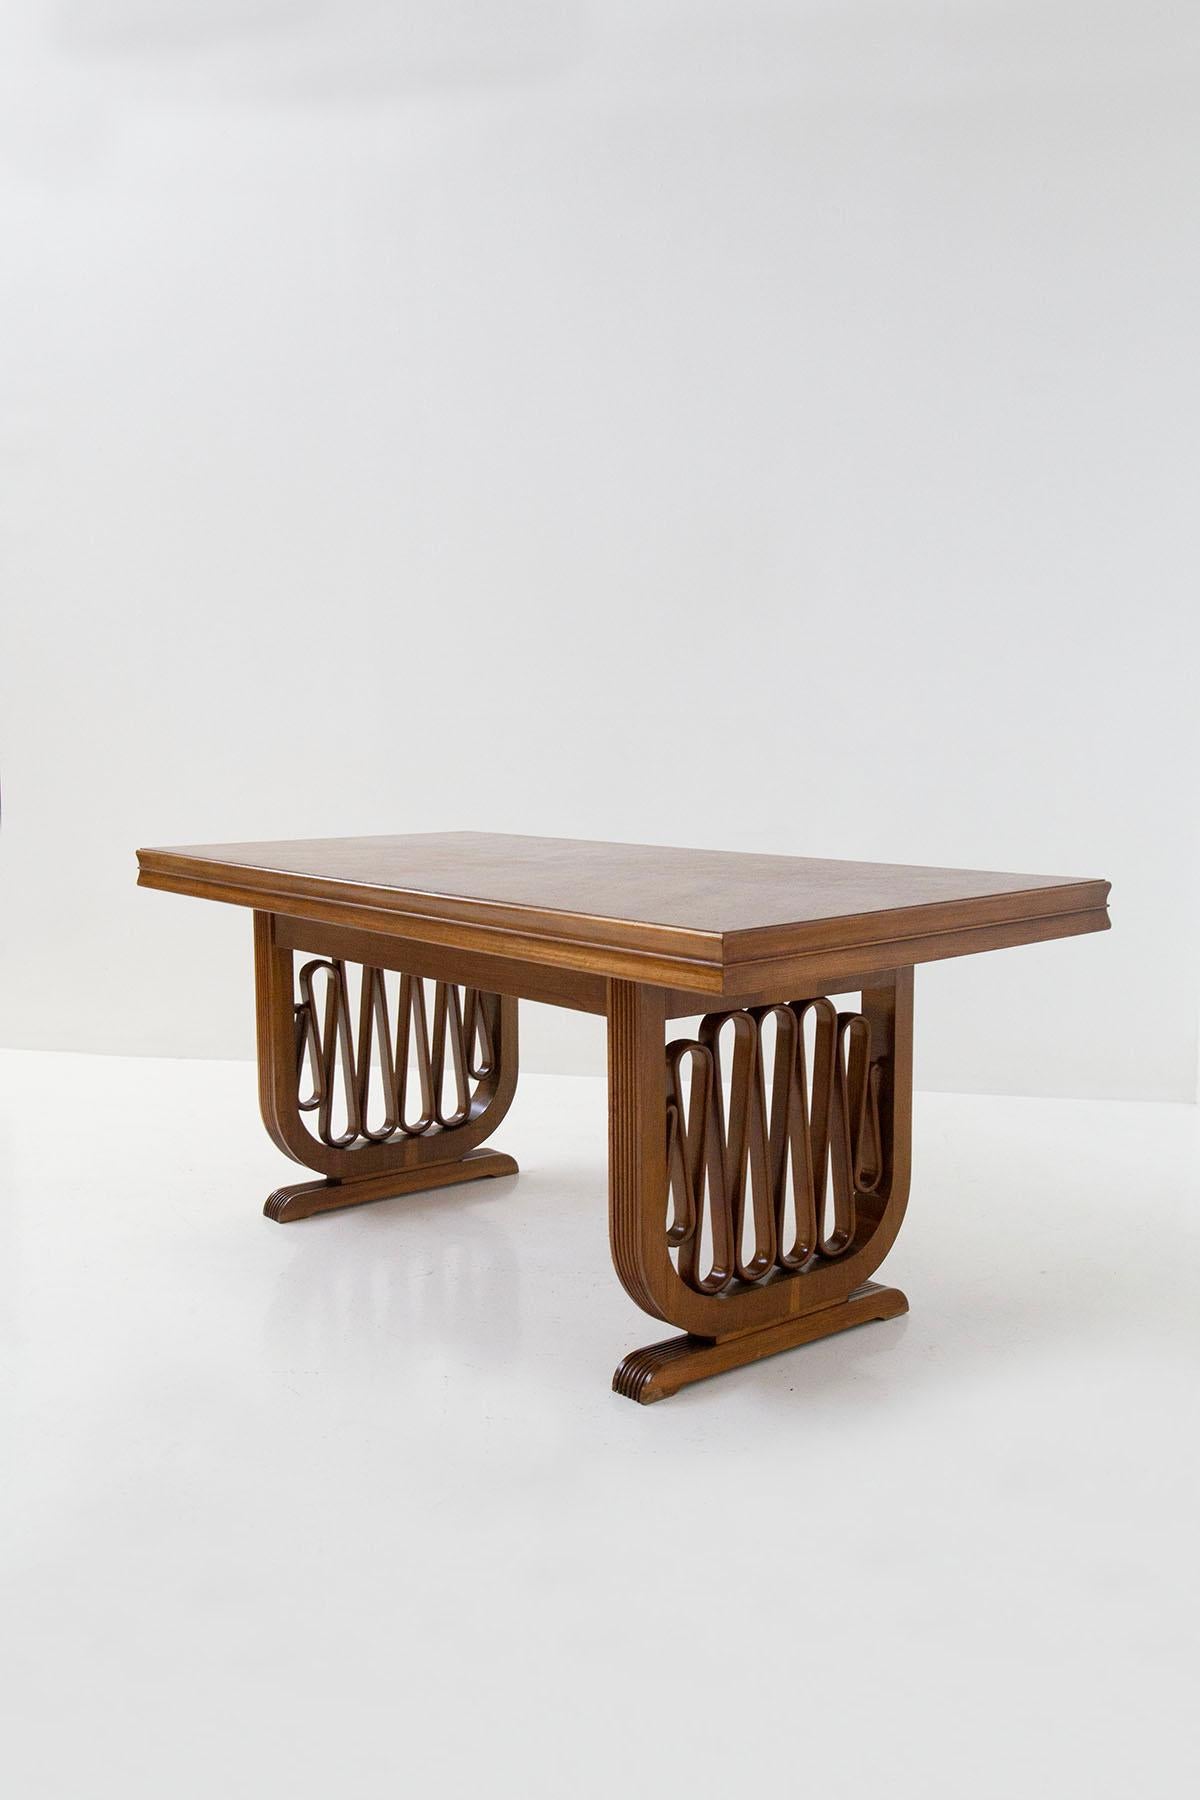 We present a charming walnut dining table attributed to the famous designer Gio Ponti, made during the extraordinary era of the 1940s and 1950s. This exquisite piece of furniture was meticulously handcrafted from fine woods, showcasing the